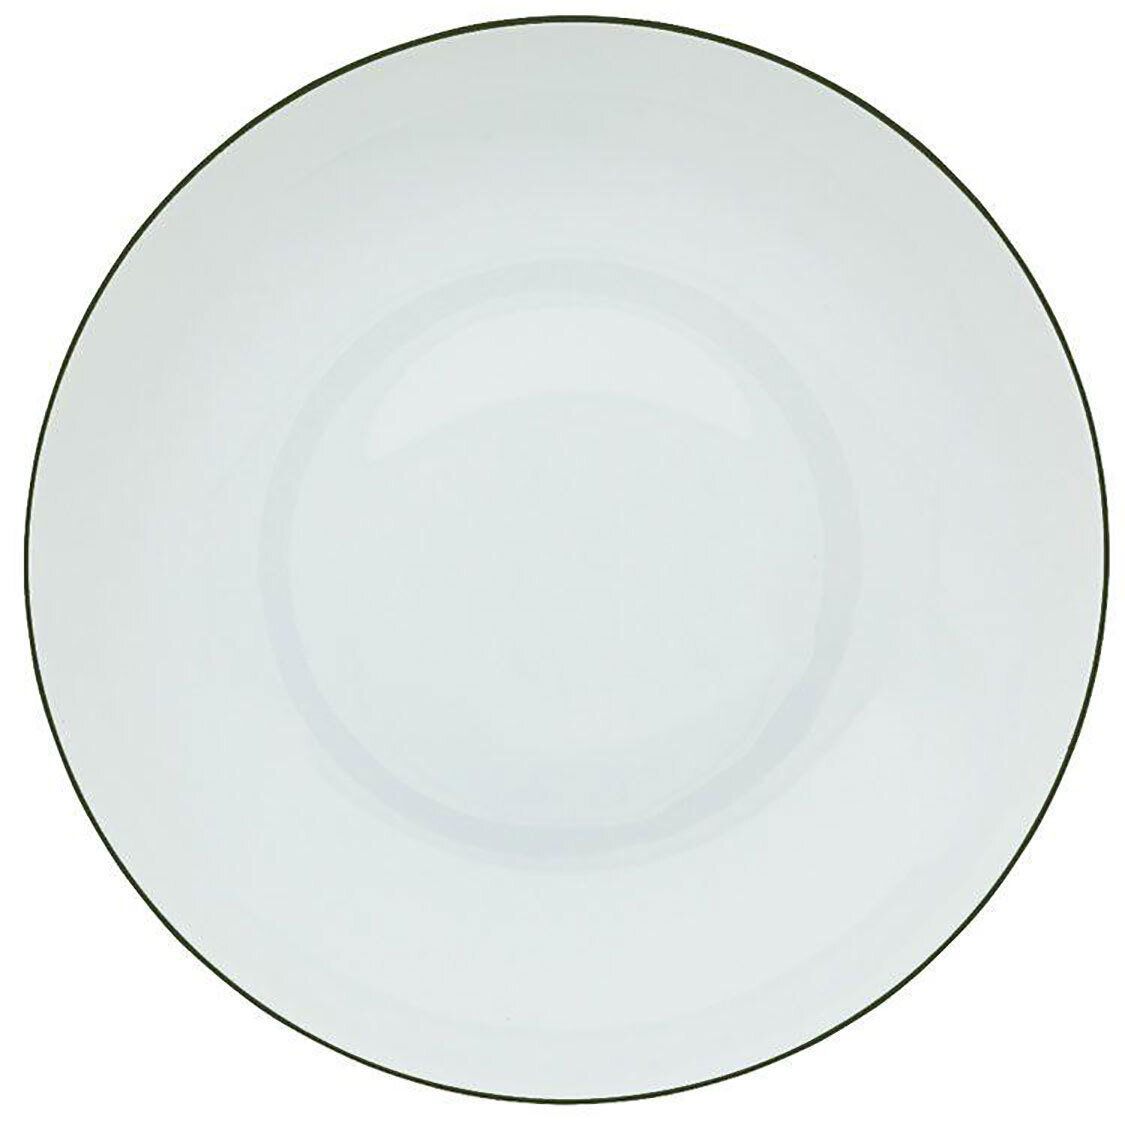 Raynaud Monceau Couleurs Empirte Green French Rim Soup Plate 0367-37-250027